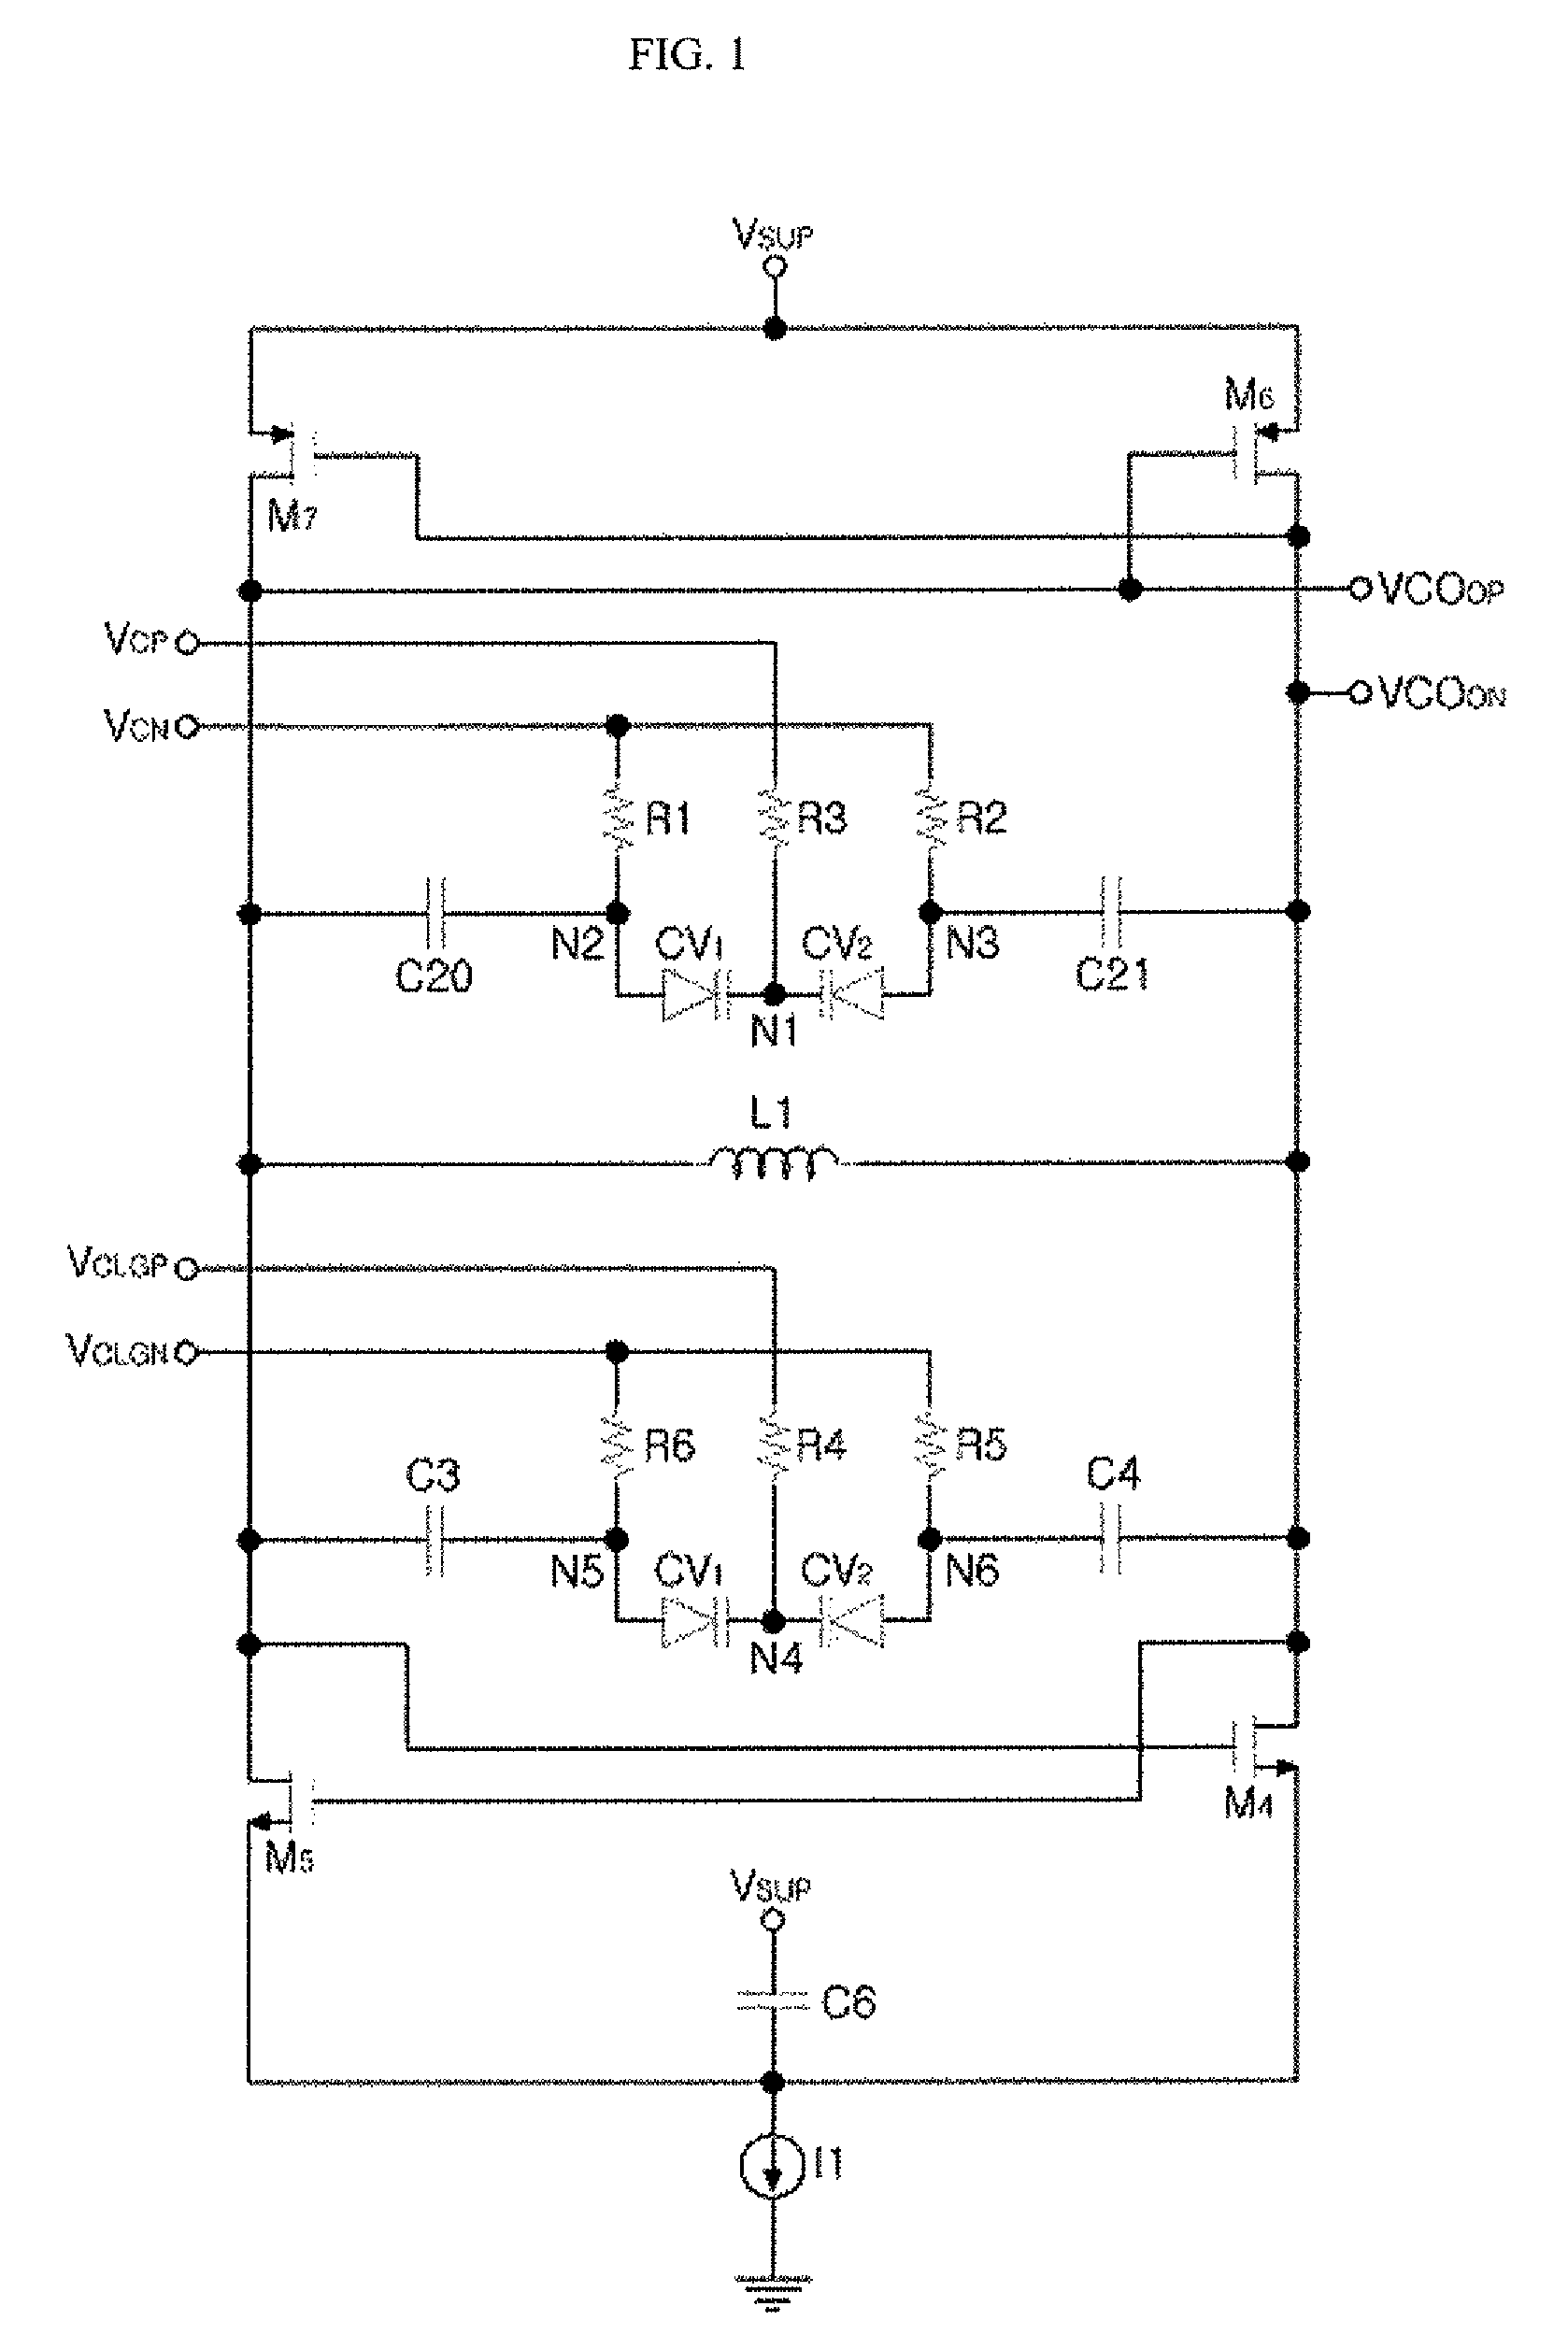 Cascode amplifier and differential cascode voltage-controlled oscillator using the same